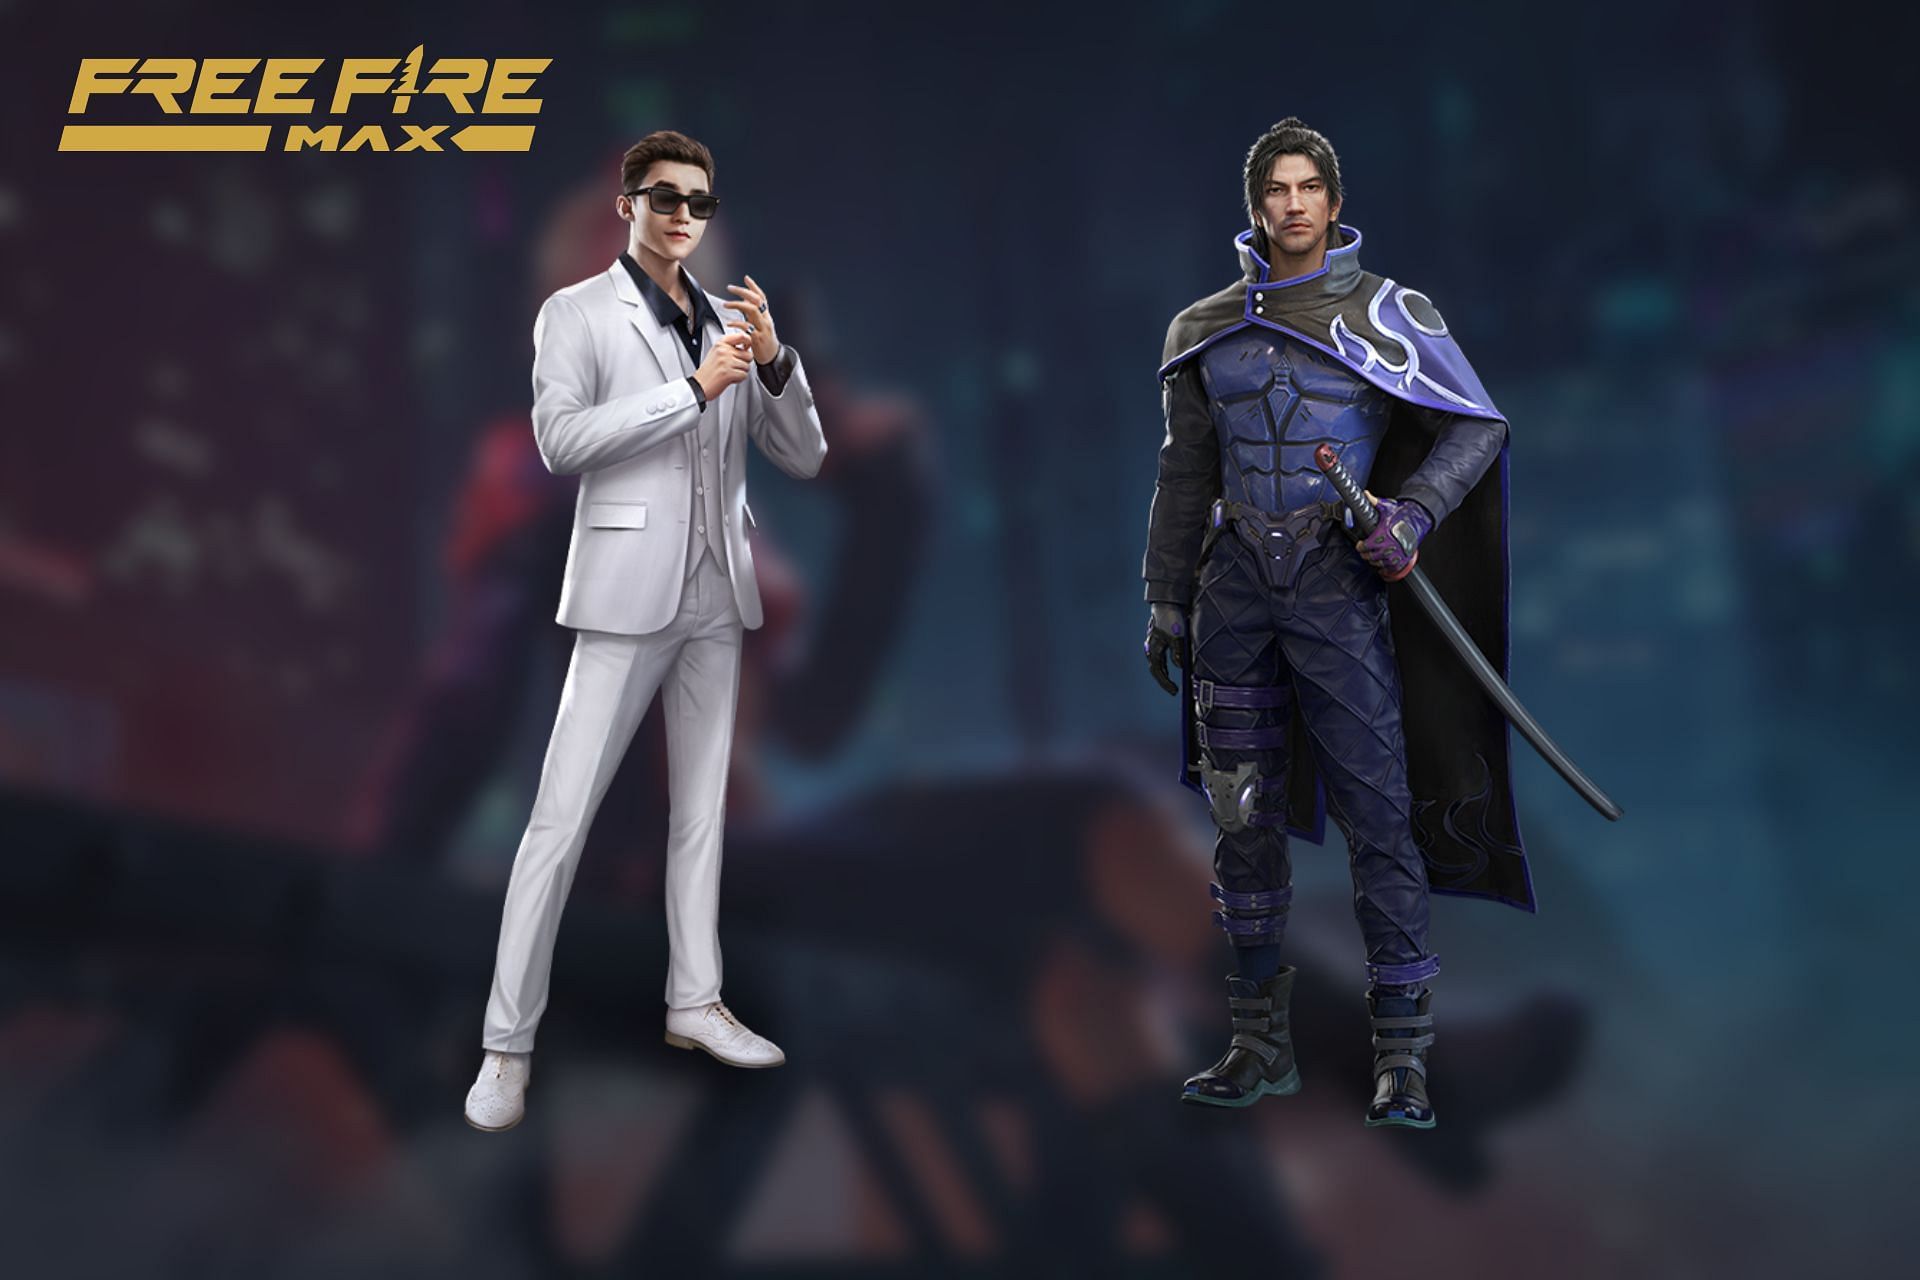 Upcoming event of Free Fire OB38 update has been revealed (Image via Sportskeeda)